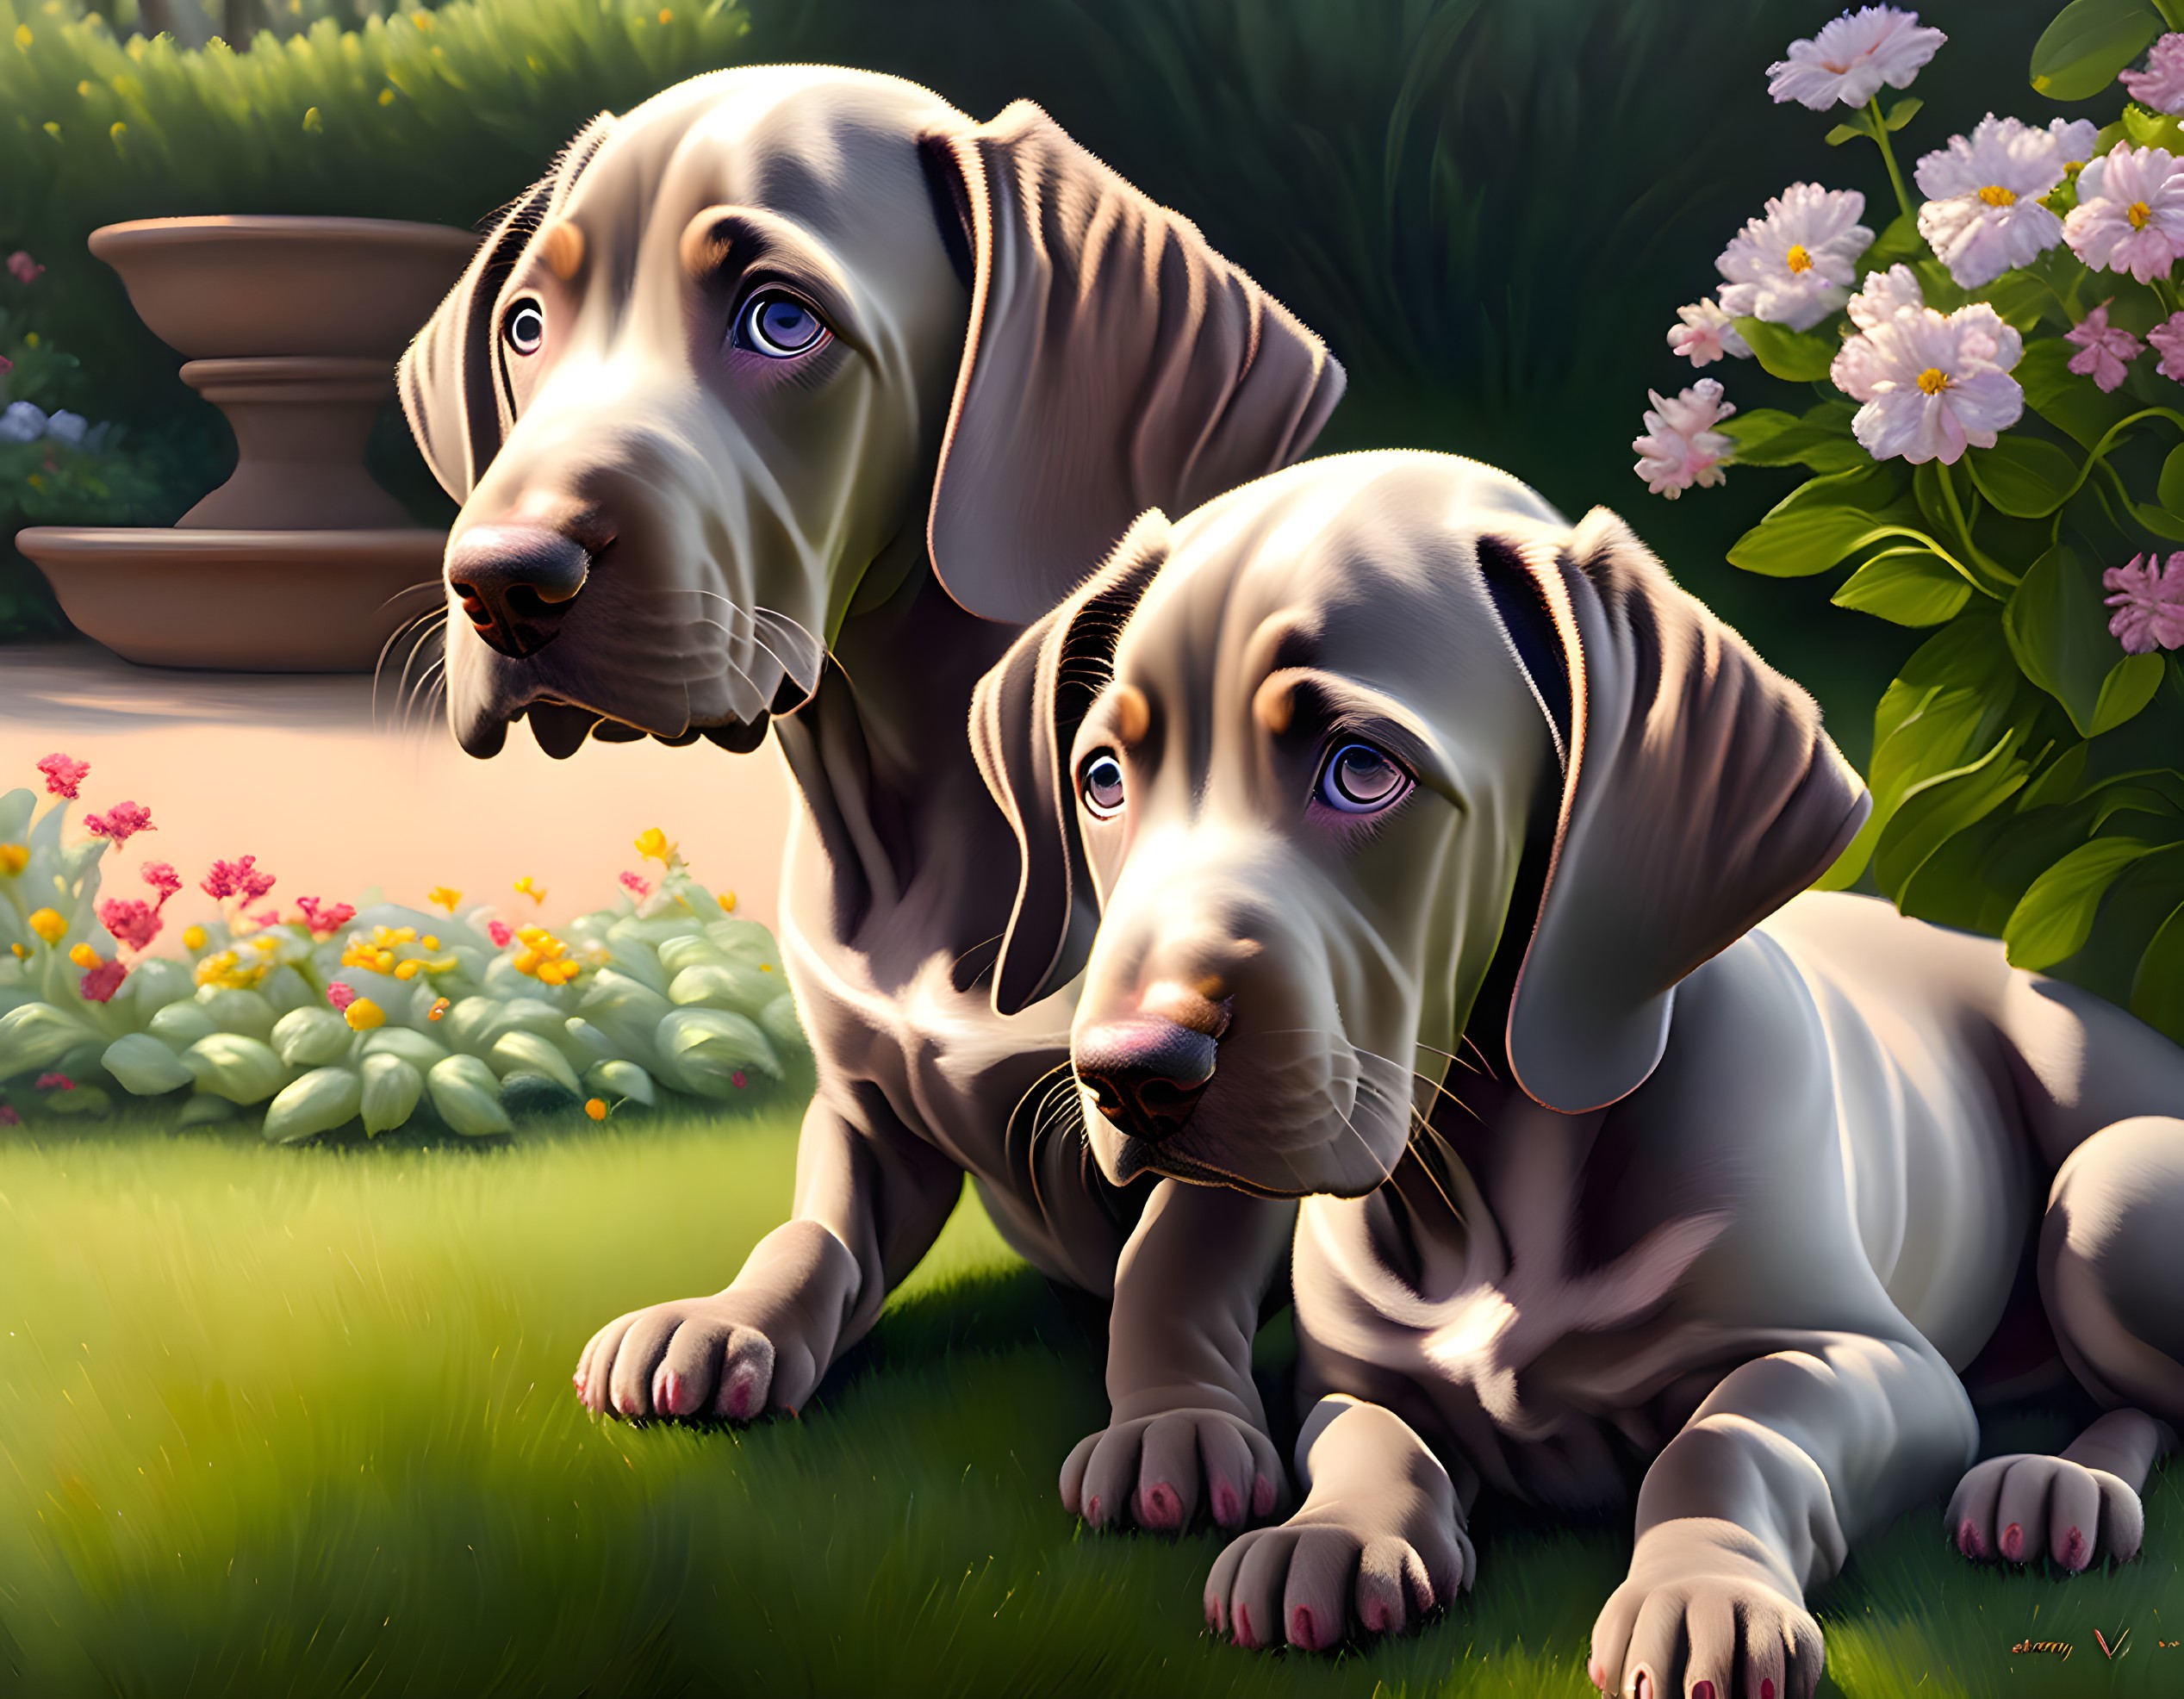 Two Weimaraner puppies in garden with blooming flowers and planter